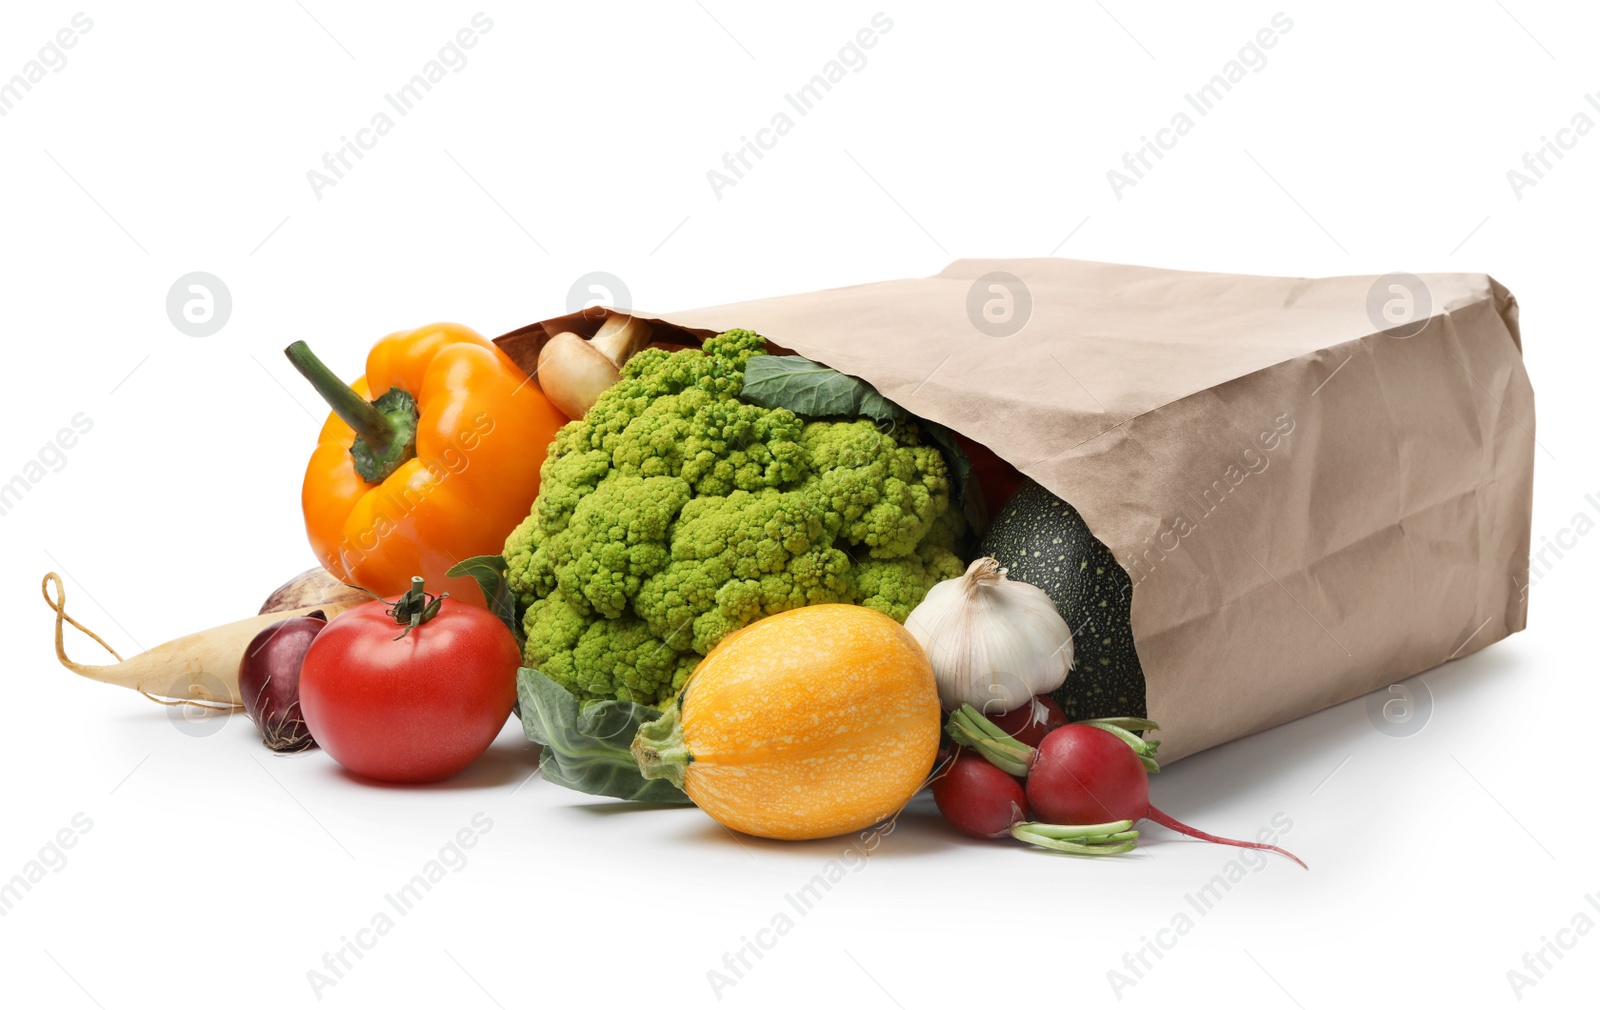 Photo of Overturned paper bag with vegetables on white background